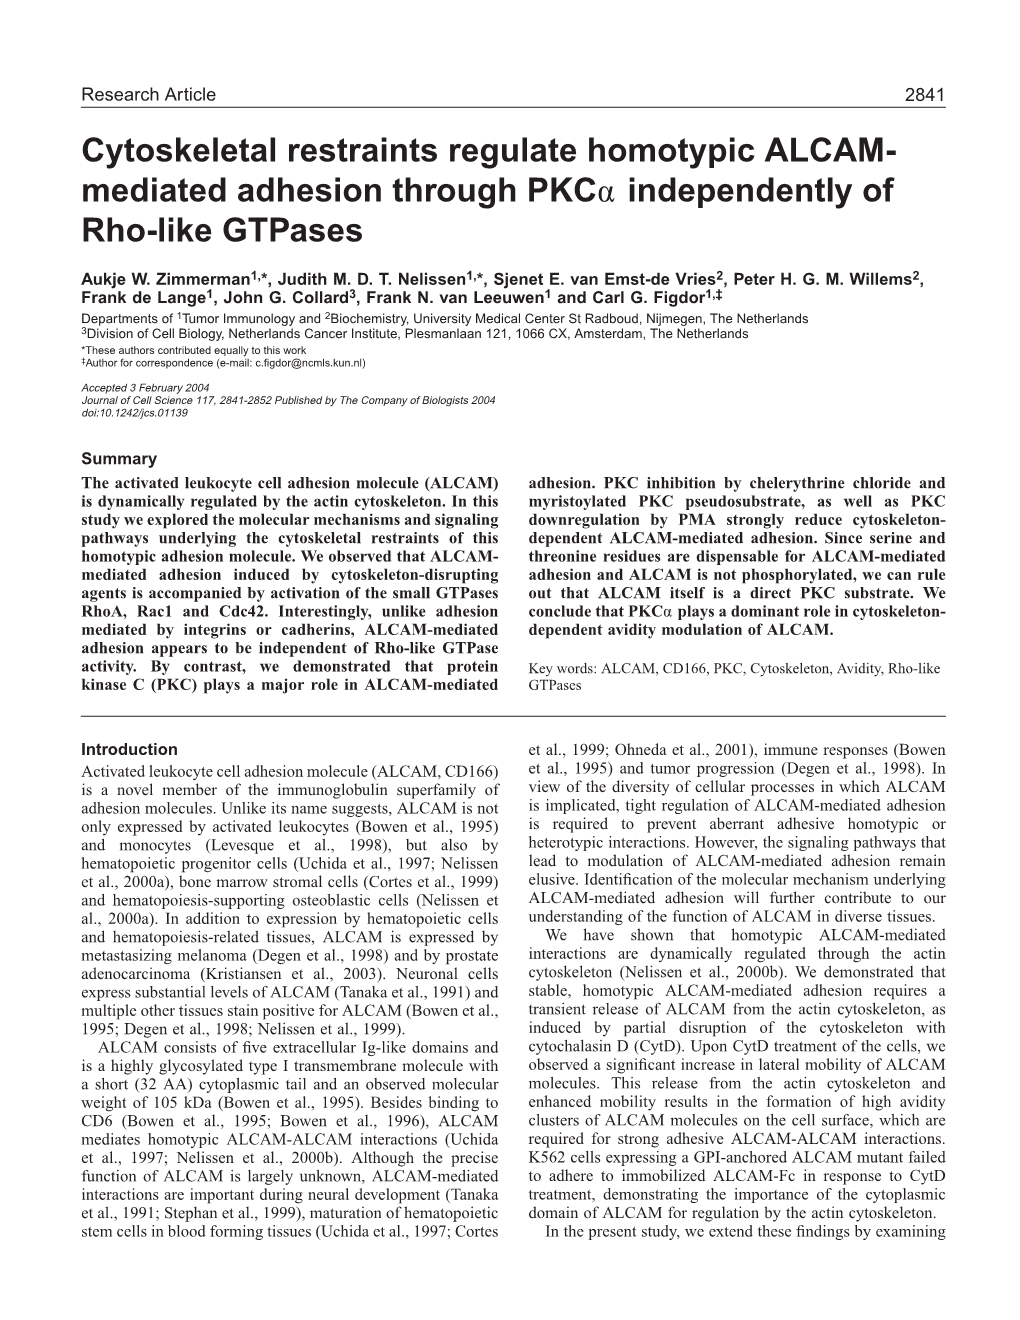 Mediated Adhesion Through Pkcα Independently of Rho-Like Gtpases